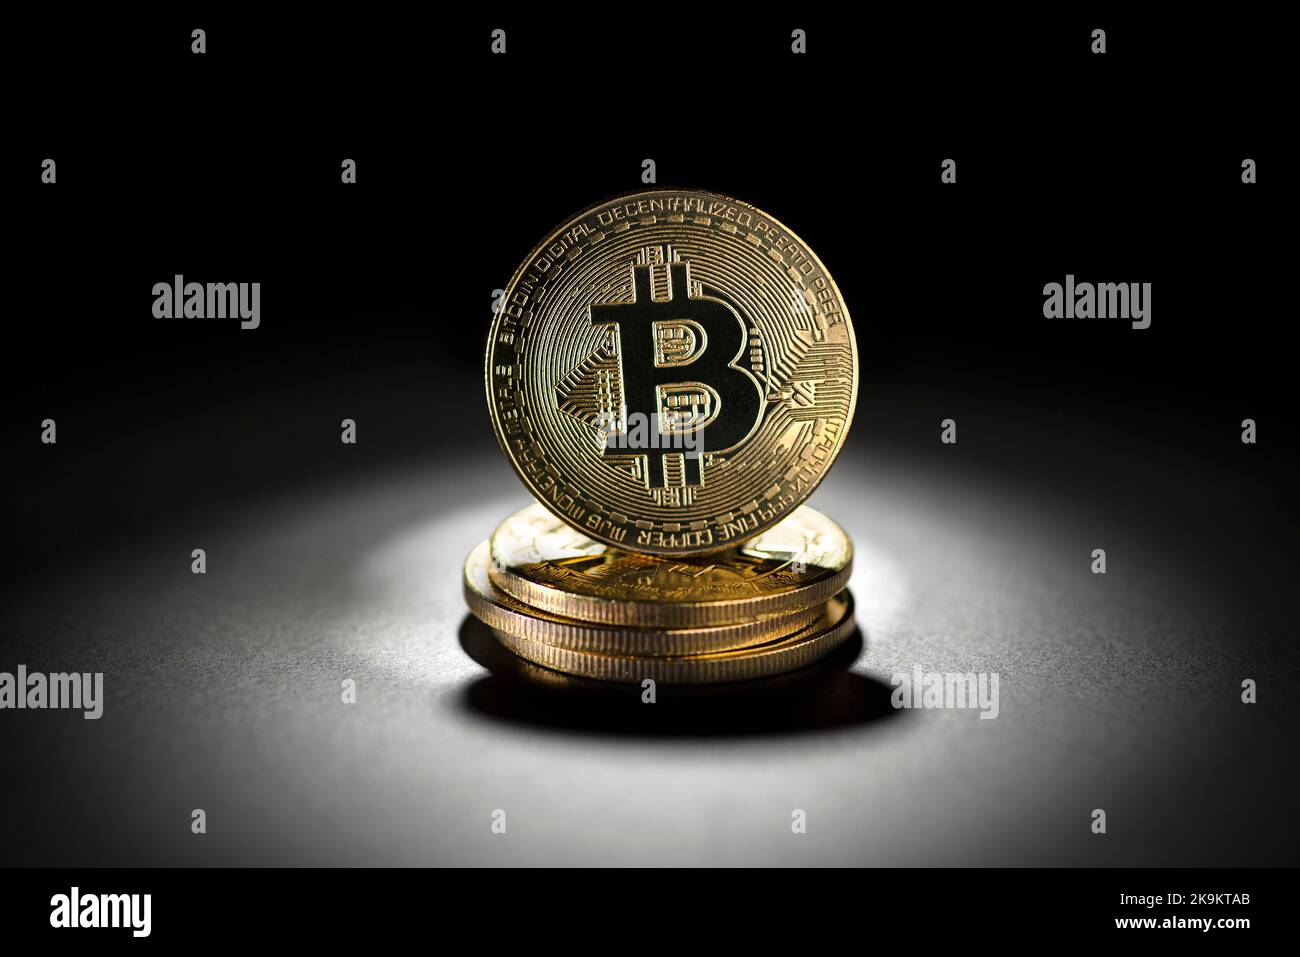 Bitcoin gold coin in black background. Virtual cryptocurrency concept. Stock Photo